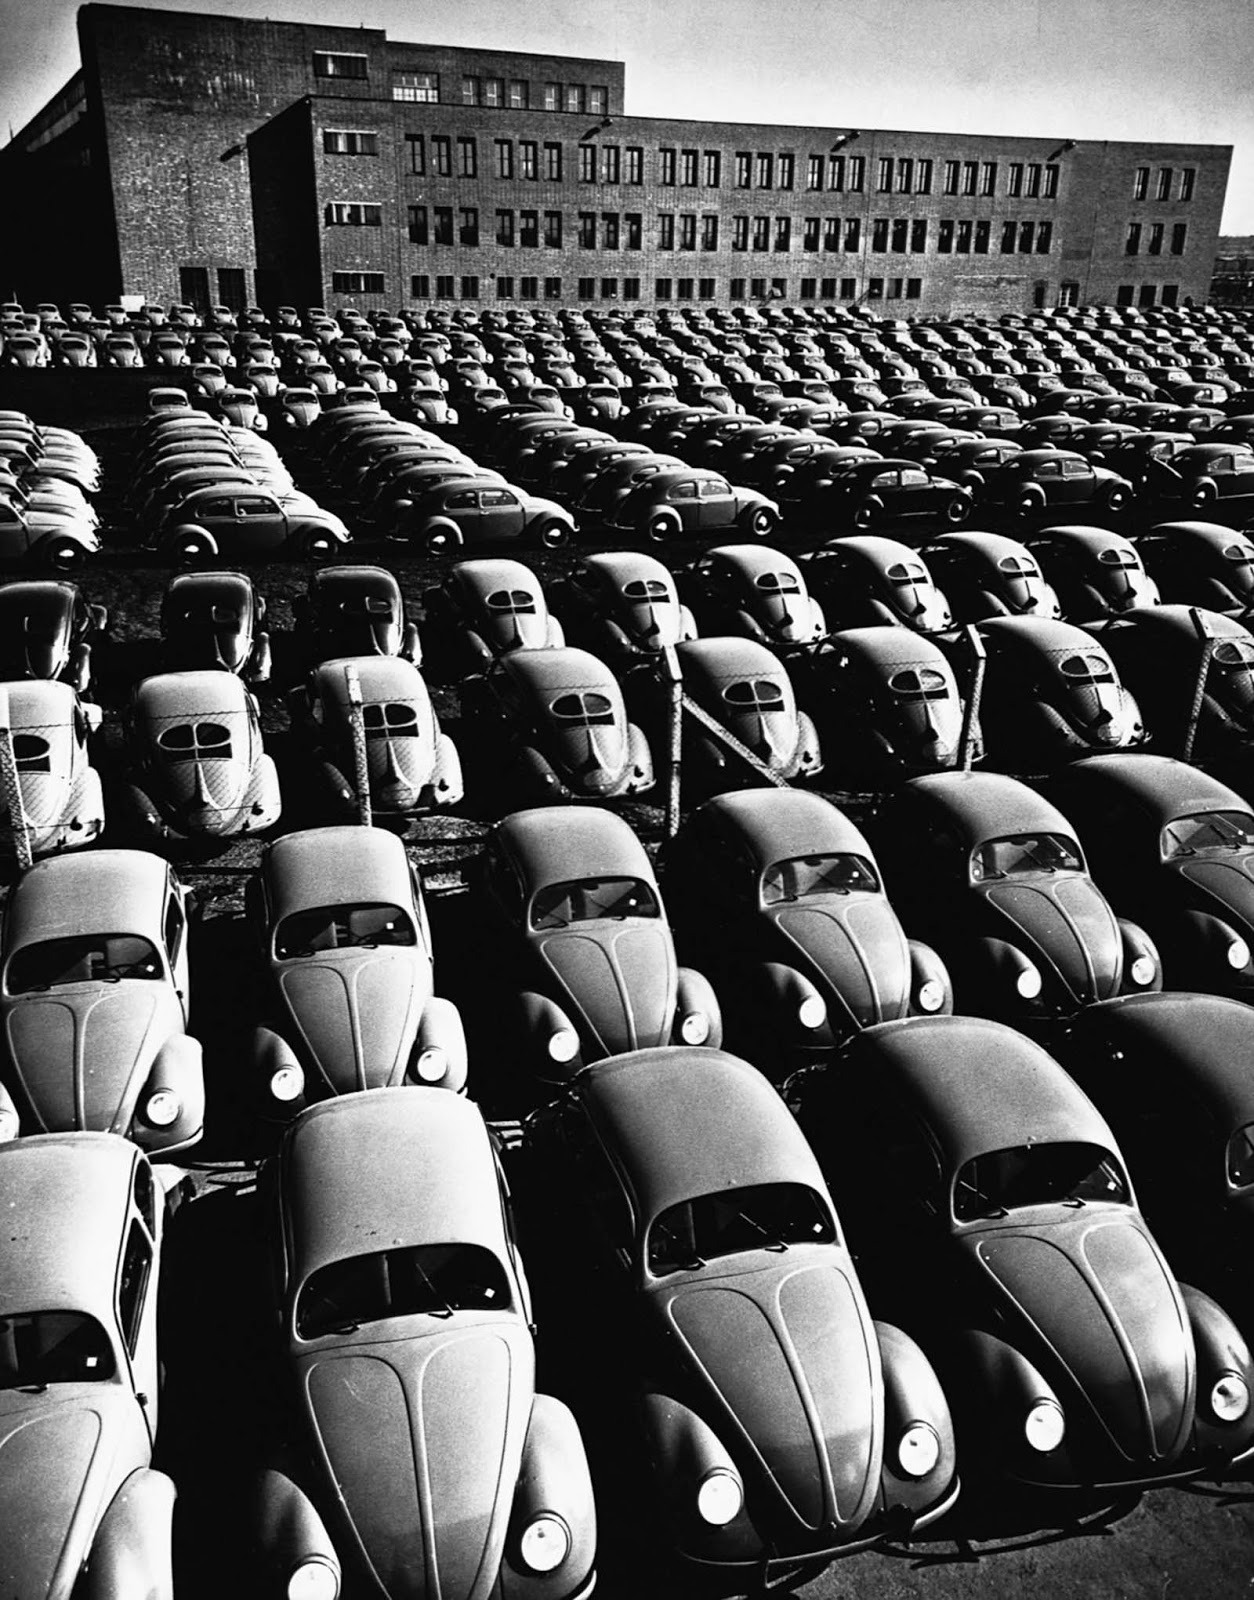 Beetles lined-up. 1953.